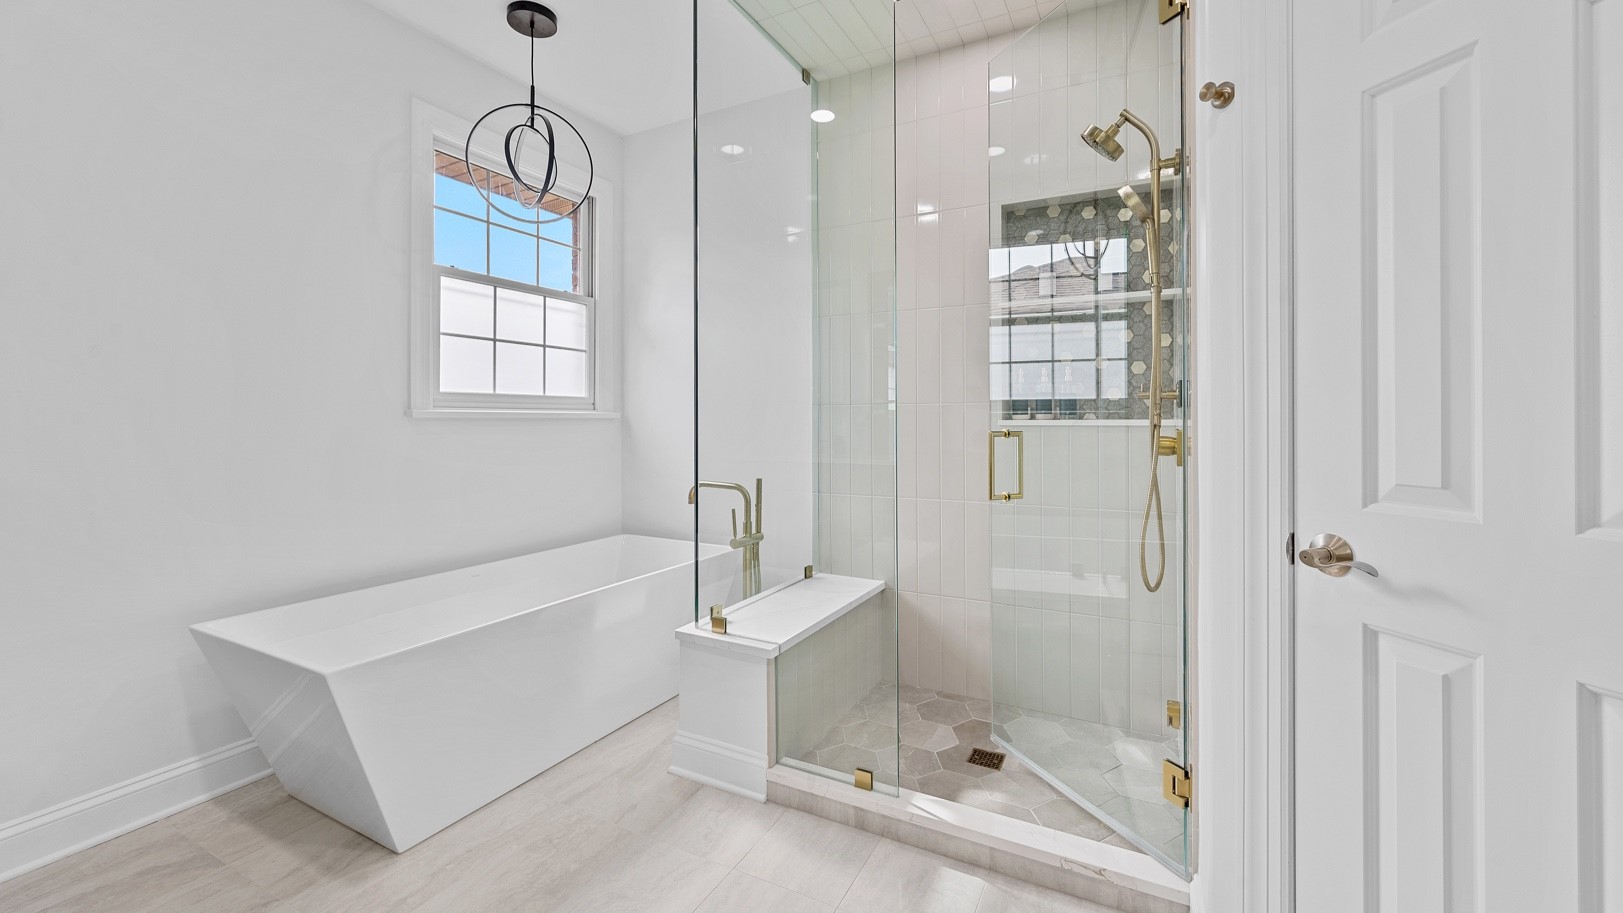 Newly remodeled Oak Park, IL bathroom with beautiful white tile flooring, large white bathtub, and new glass shower unit by 4Ever Remodeling